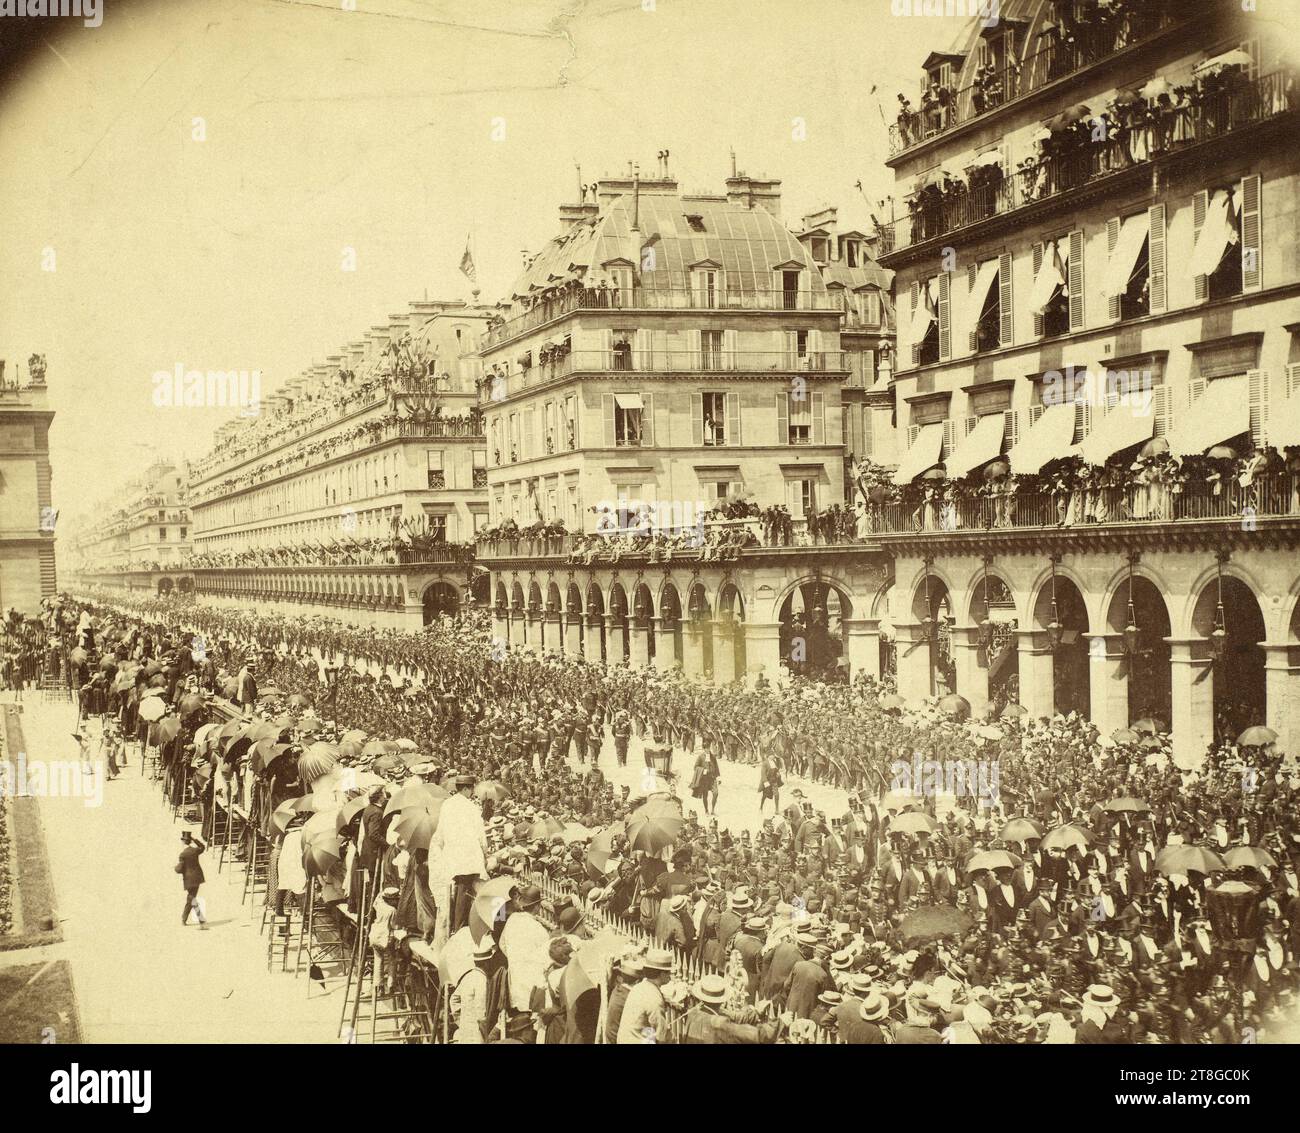 Victor Hugo's funeral, second part of the national event: the official procession on rue de Rivoli, 1st arrondissement, Paris, June 1, 1885, Photographer, In 1885, Photography, Graphic arts, Photography, Dimensions - Work: Height: 21 cm, Width: 27 cm Stock Photo